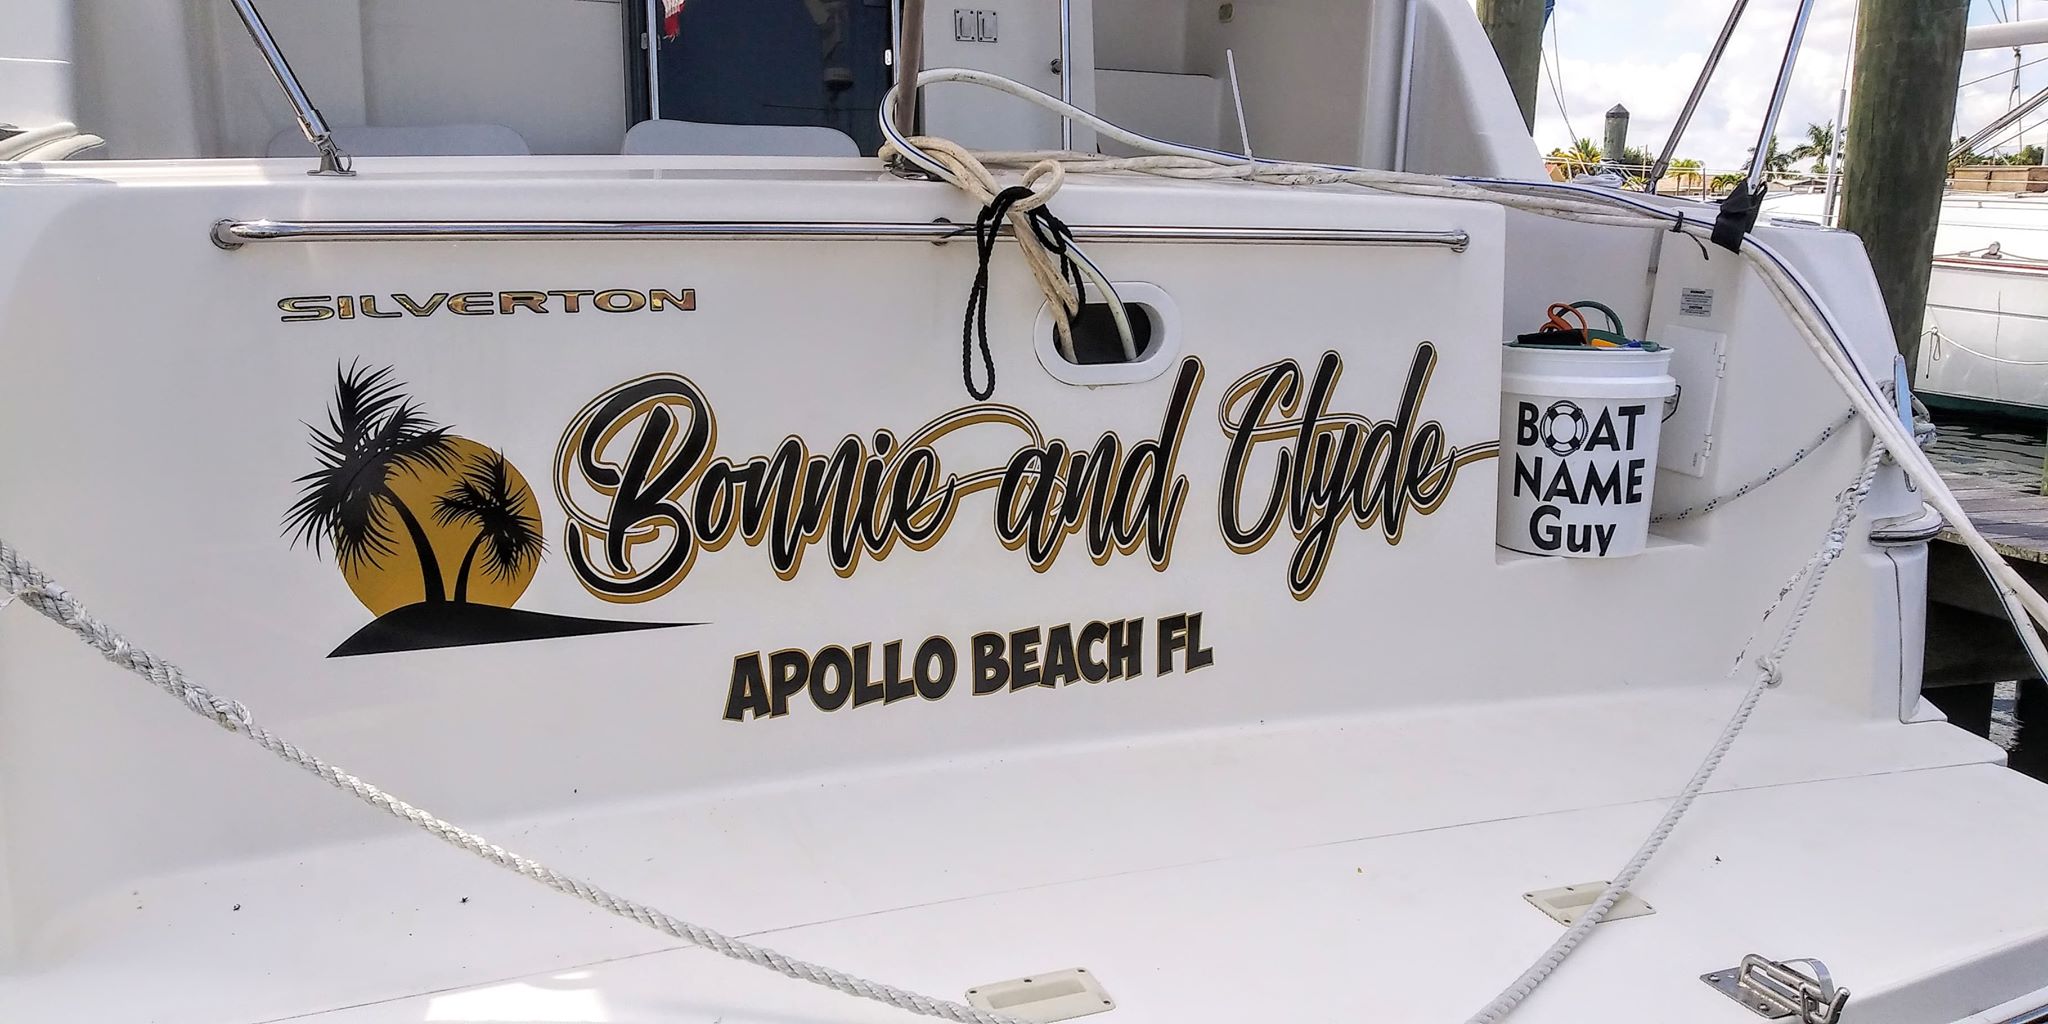 Bonnie and Clyde Boat Name